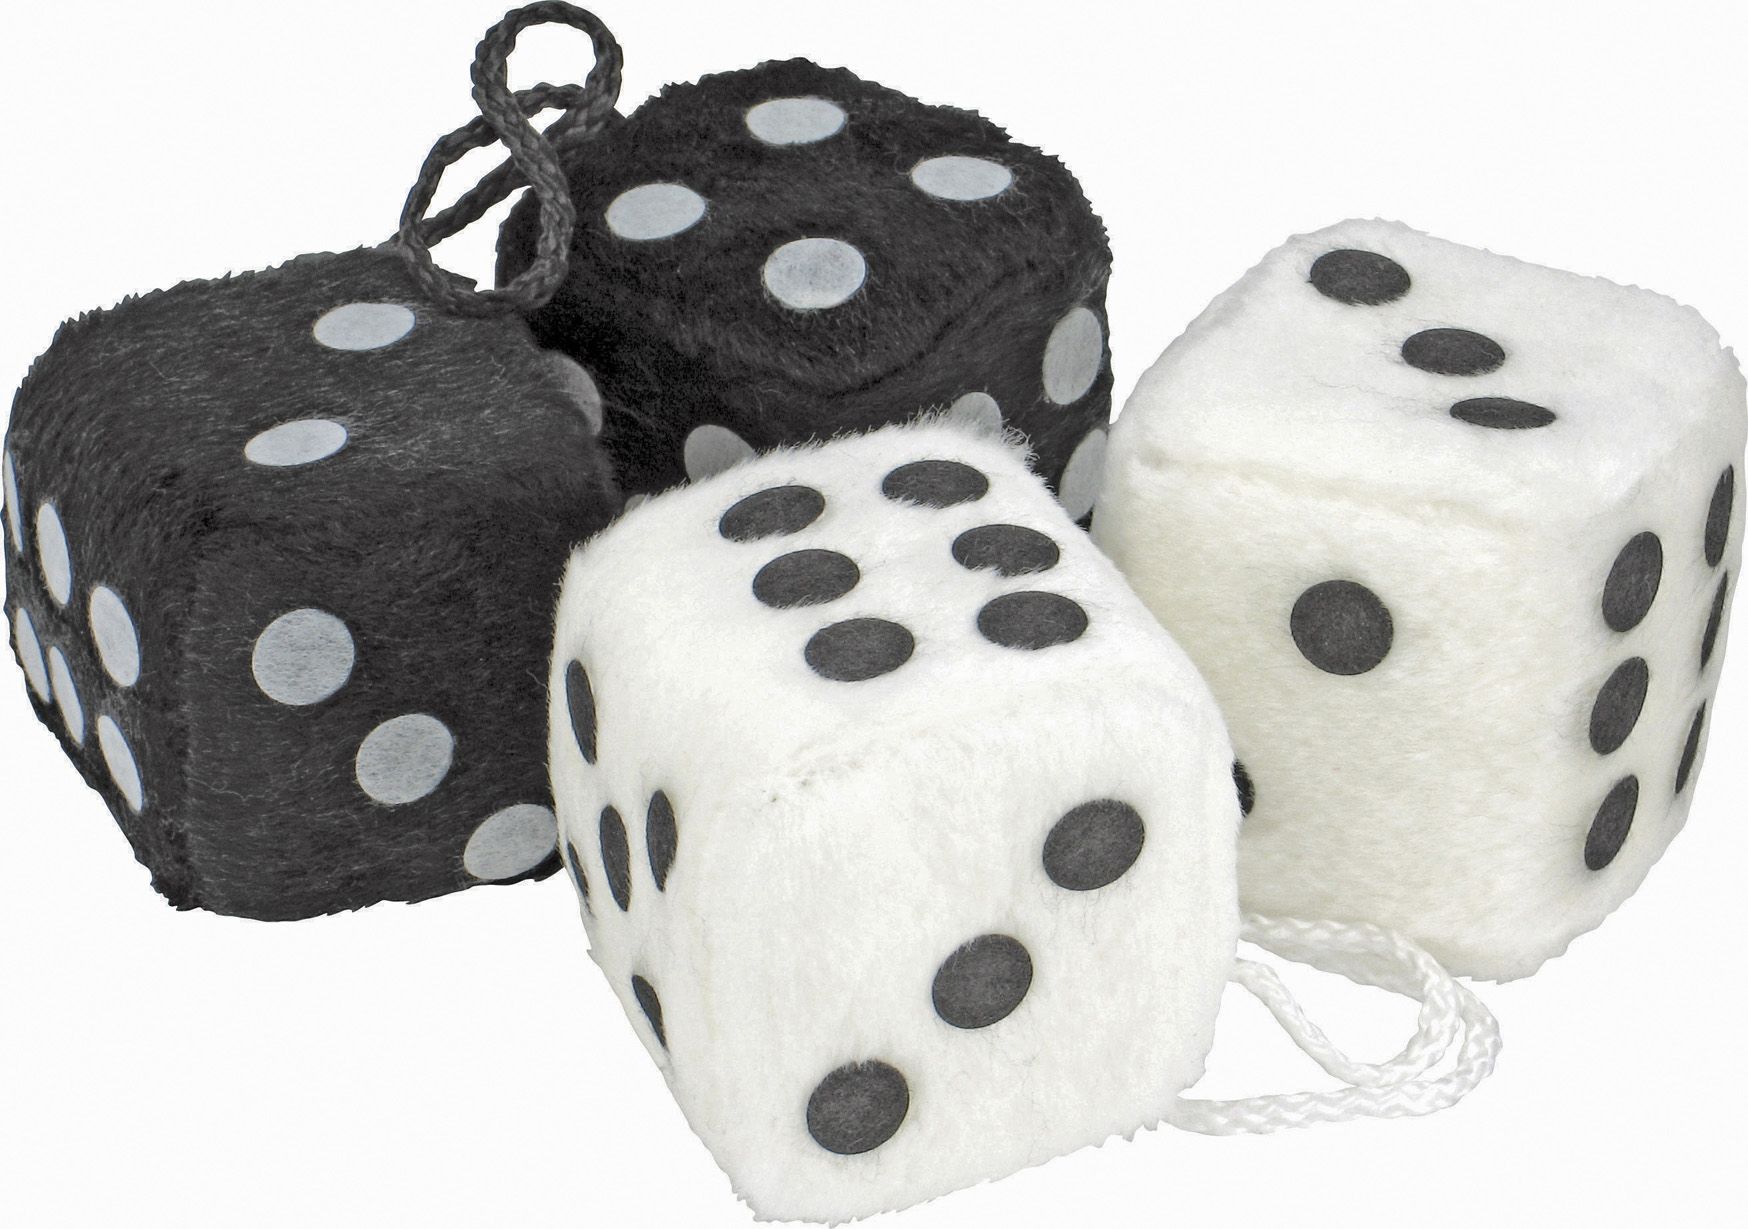 Assorted Fuzzy Dice Black/white and White/Black